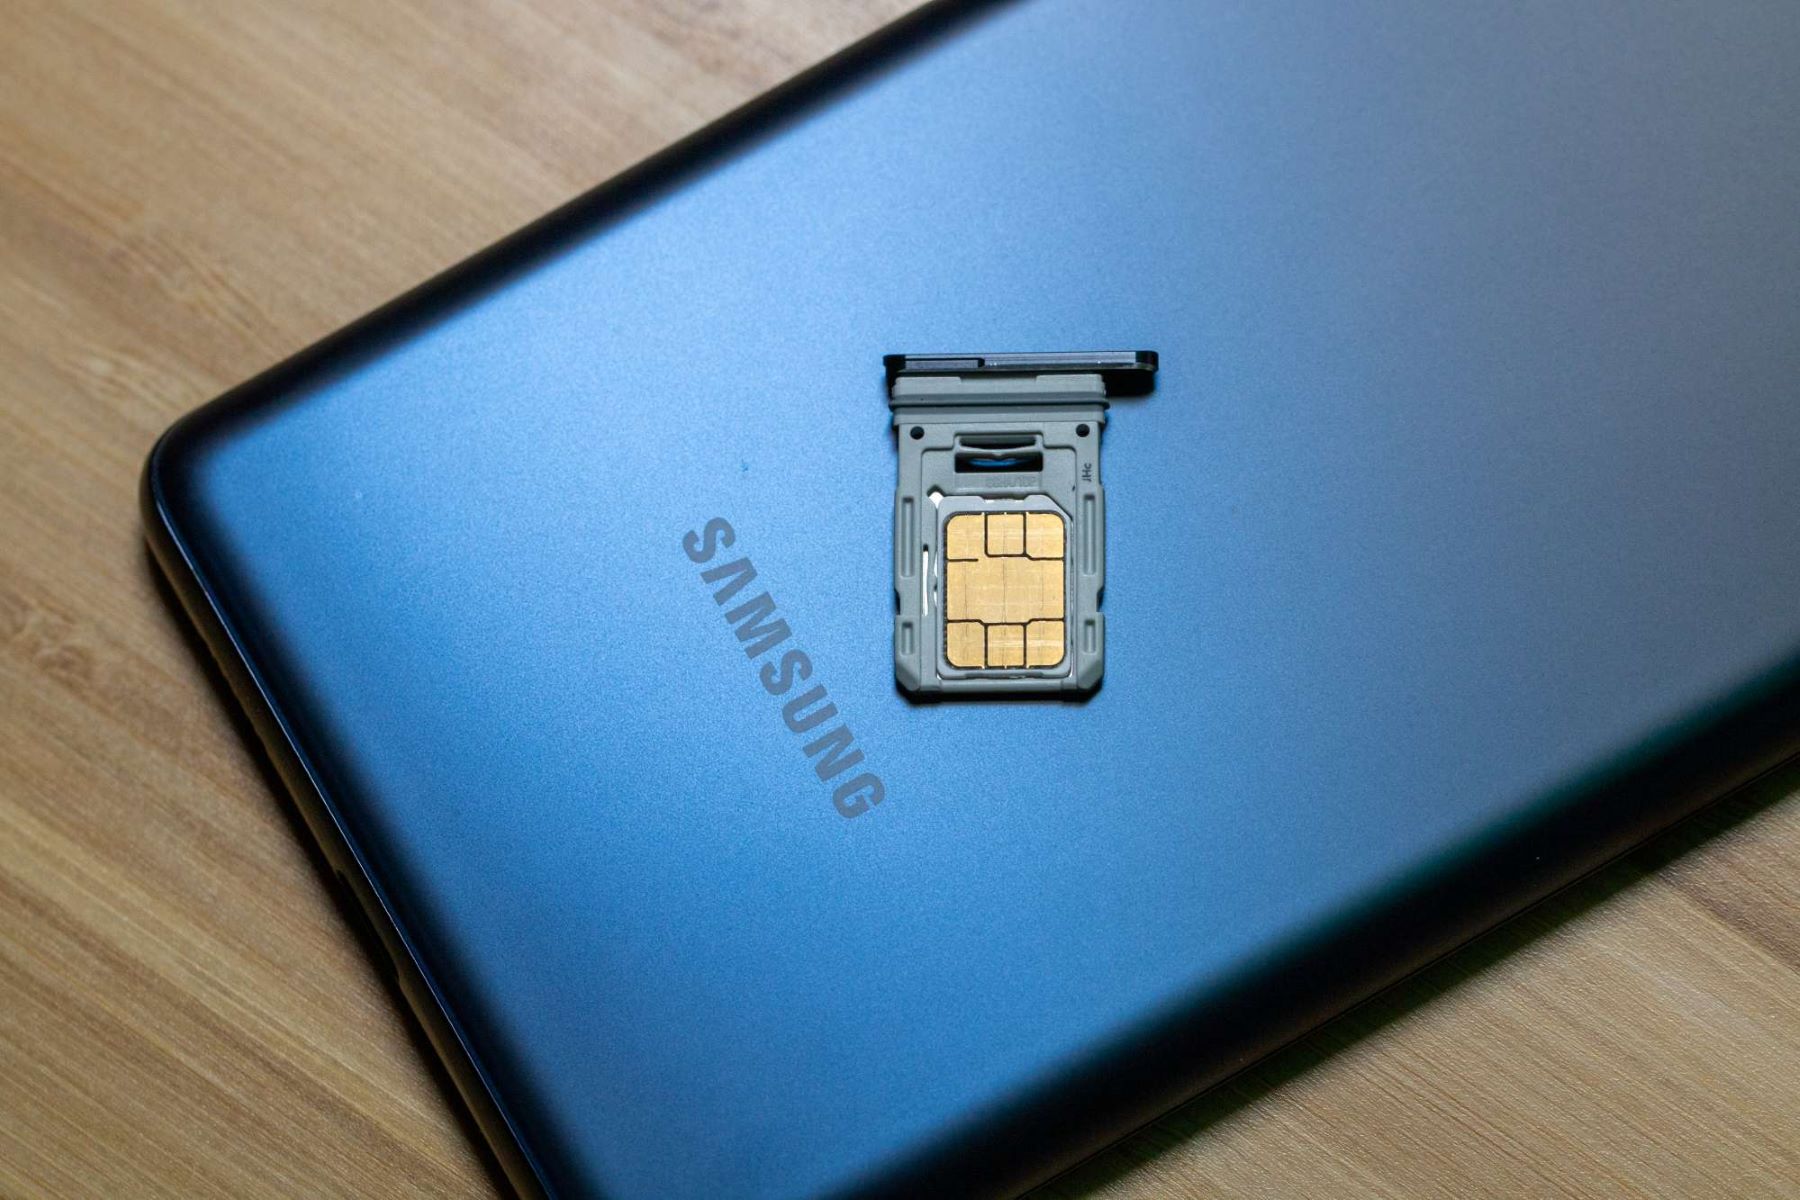 changing-sim-card-on-samsung-illustrated-instructions